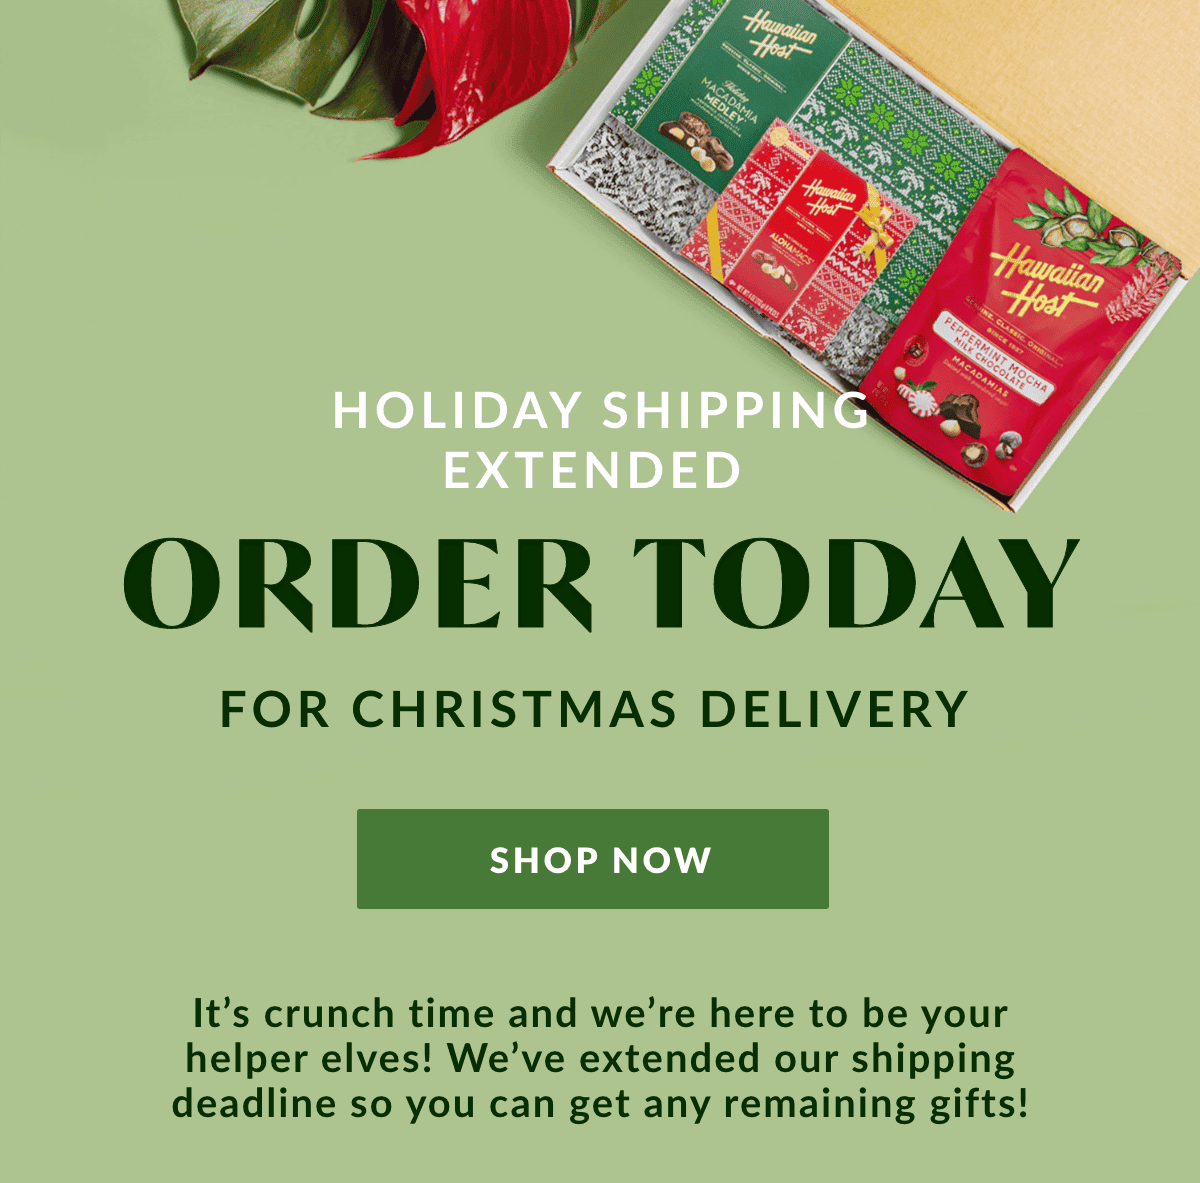 Order today by midnight for Christmas Delivery!